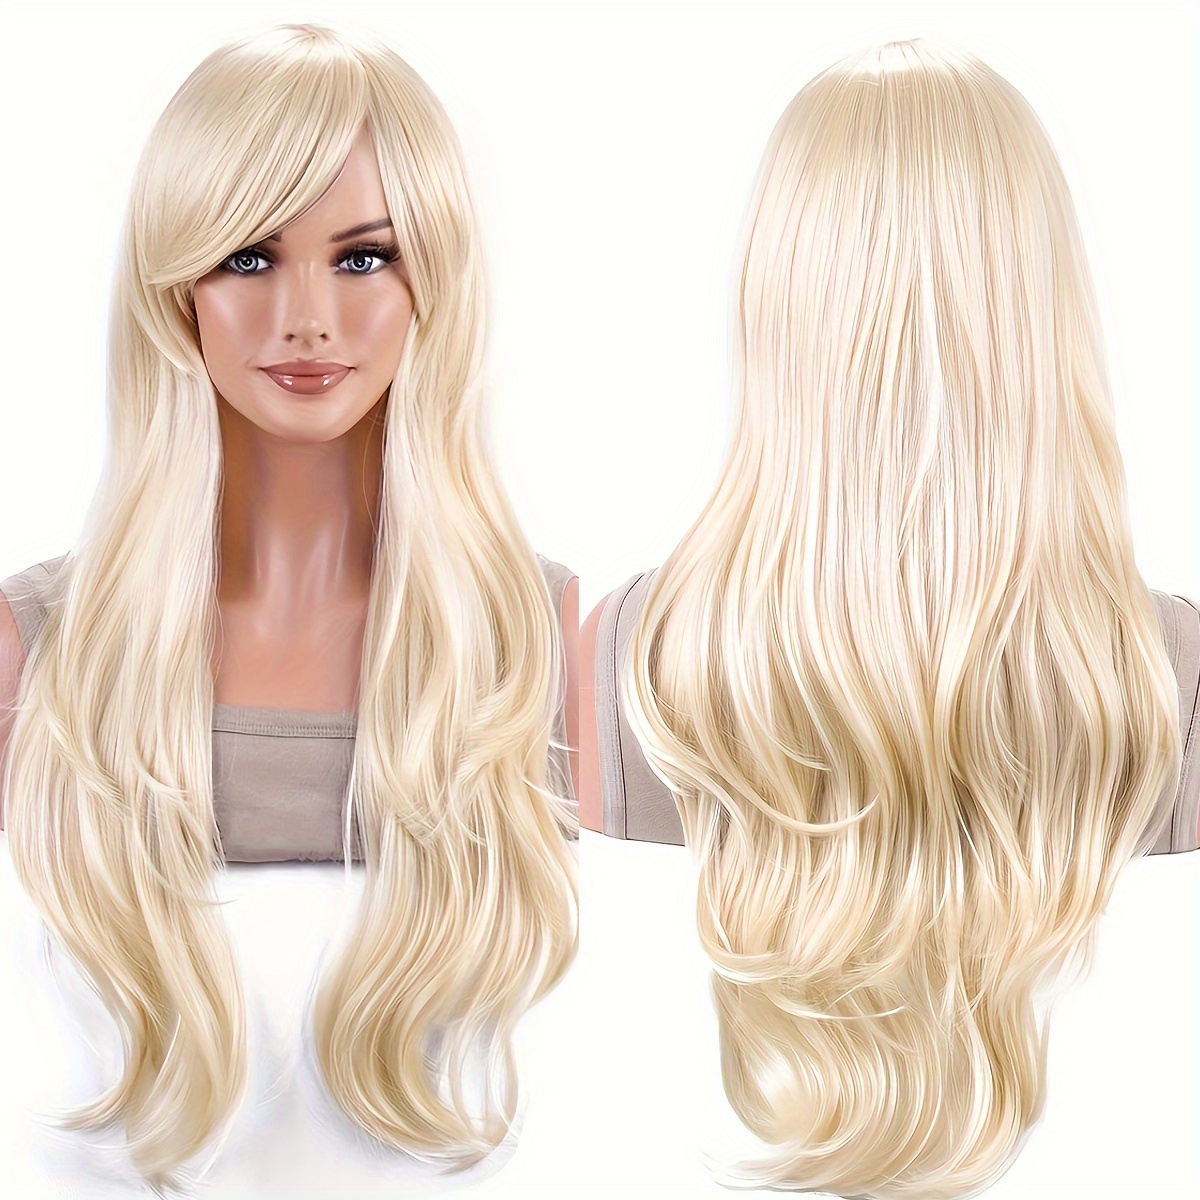 

Light Blonde Wig With Diagonal Bangs Natural Medium Long Wavy Wig For Women Heat-resistant Fiber Synthetic Wig For Daily Cosplay